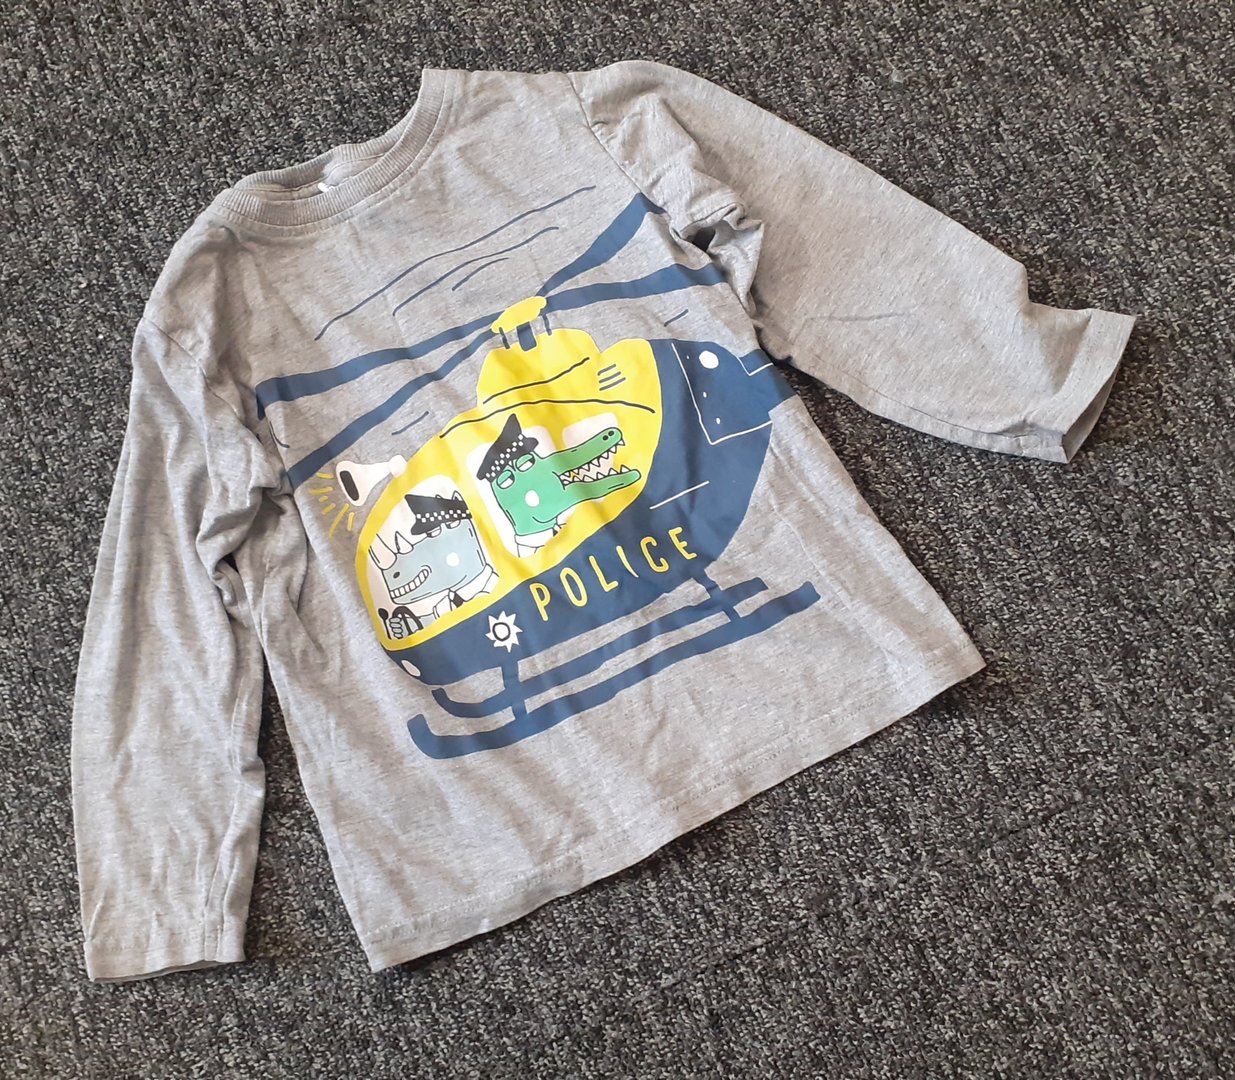 PRELOVED M&S Grey Long Sleeve T-Shirt w/ Police Design 3-4Yrs (98-104cm) RRP 8 CLEARANCE XL 2.49